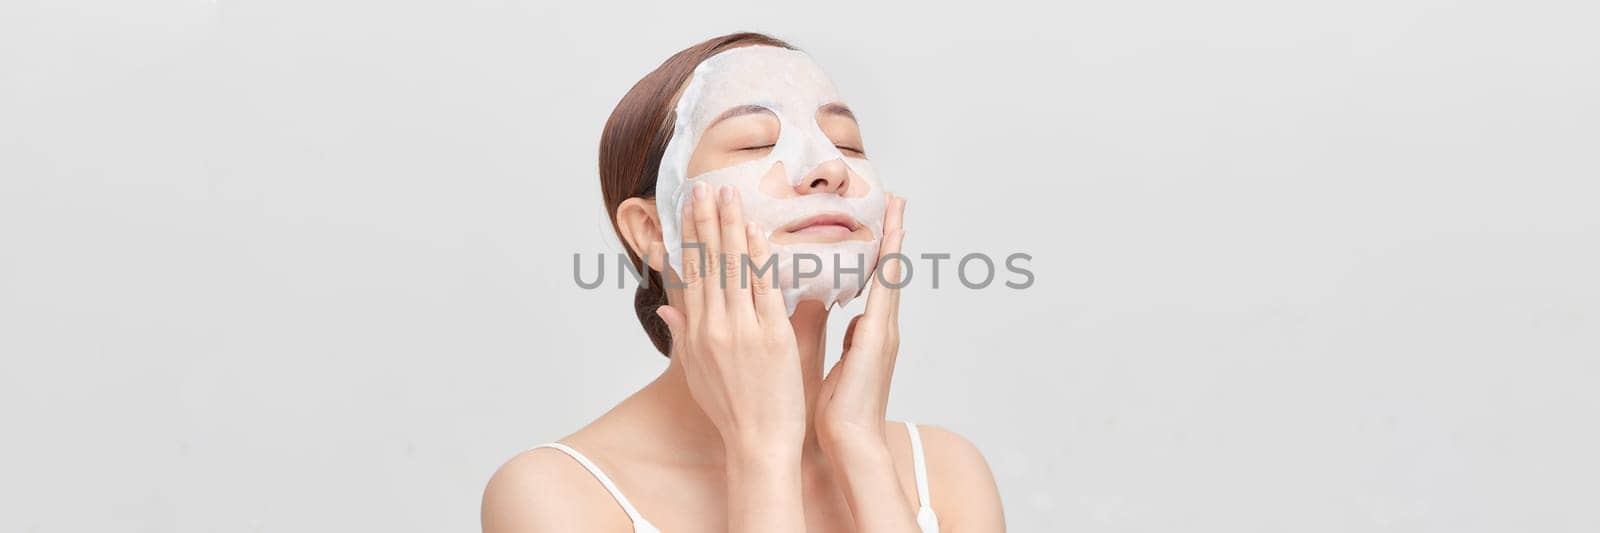 Banner of beautiful young woman applying rejuvenation facial mask on her face by makidotvn